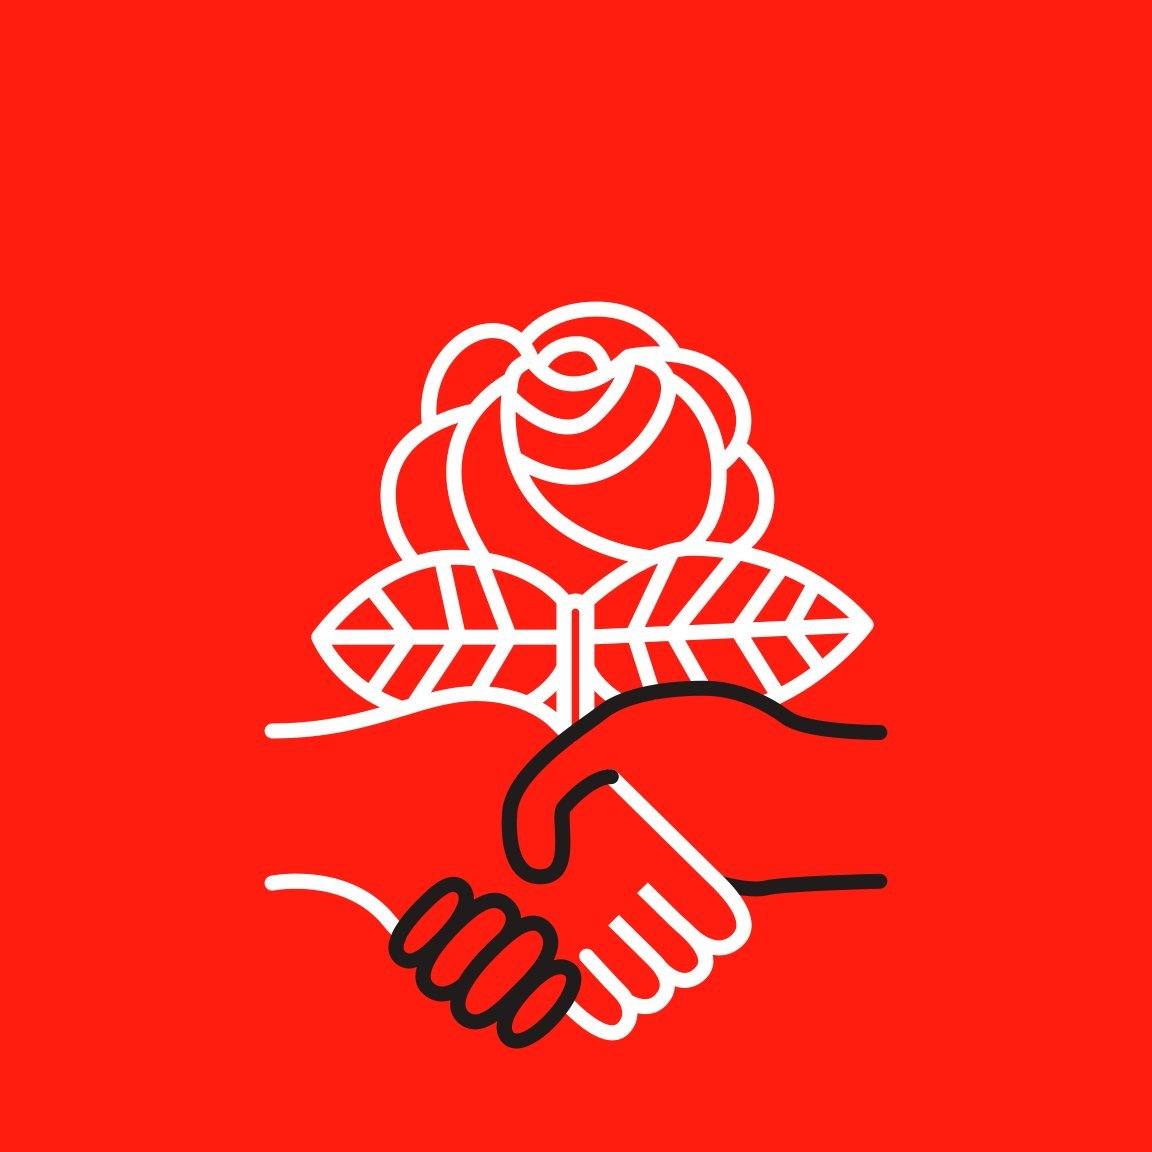 Transylvania University’s chapter of the Young Democratic Socialists of America • Lexington, KY